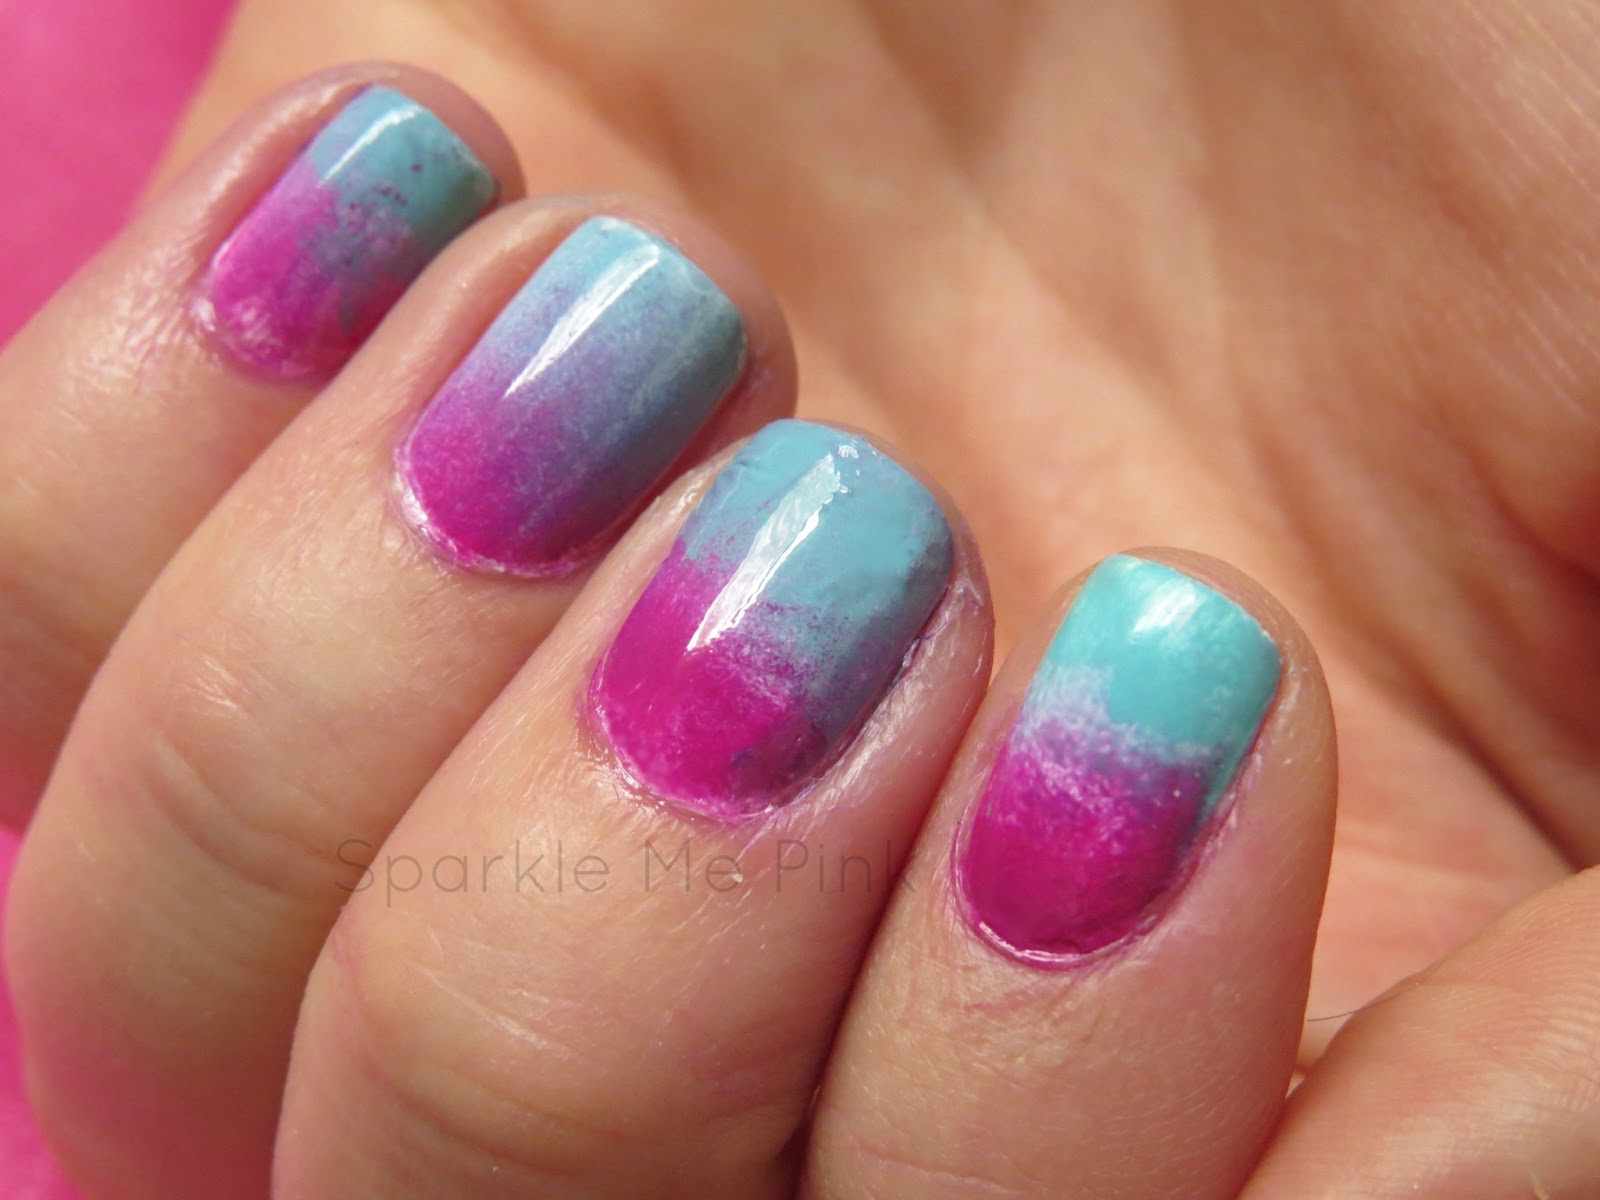 Sparkle Me Pink: How To - DIY Ombre Gradient Nails - Everyone Can Do This